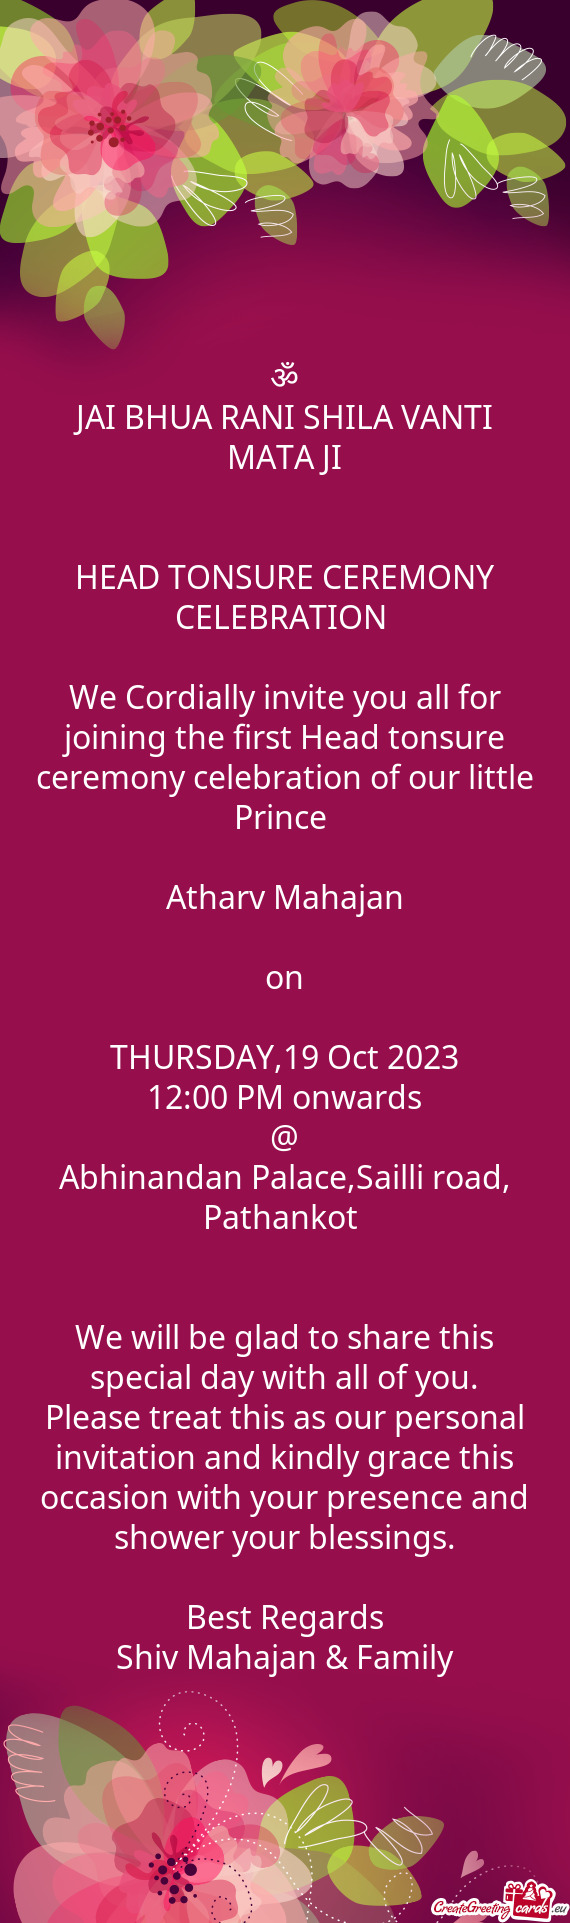 We will be glad to share this special day with all of you